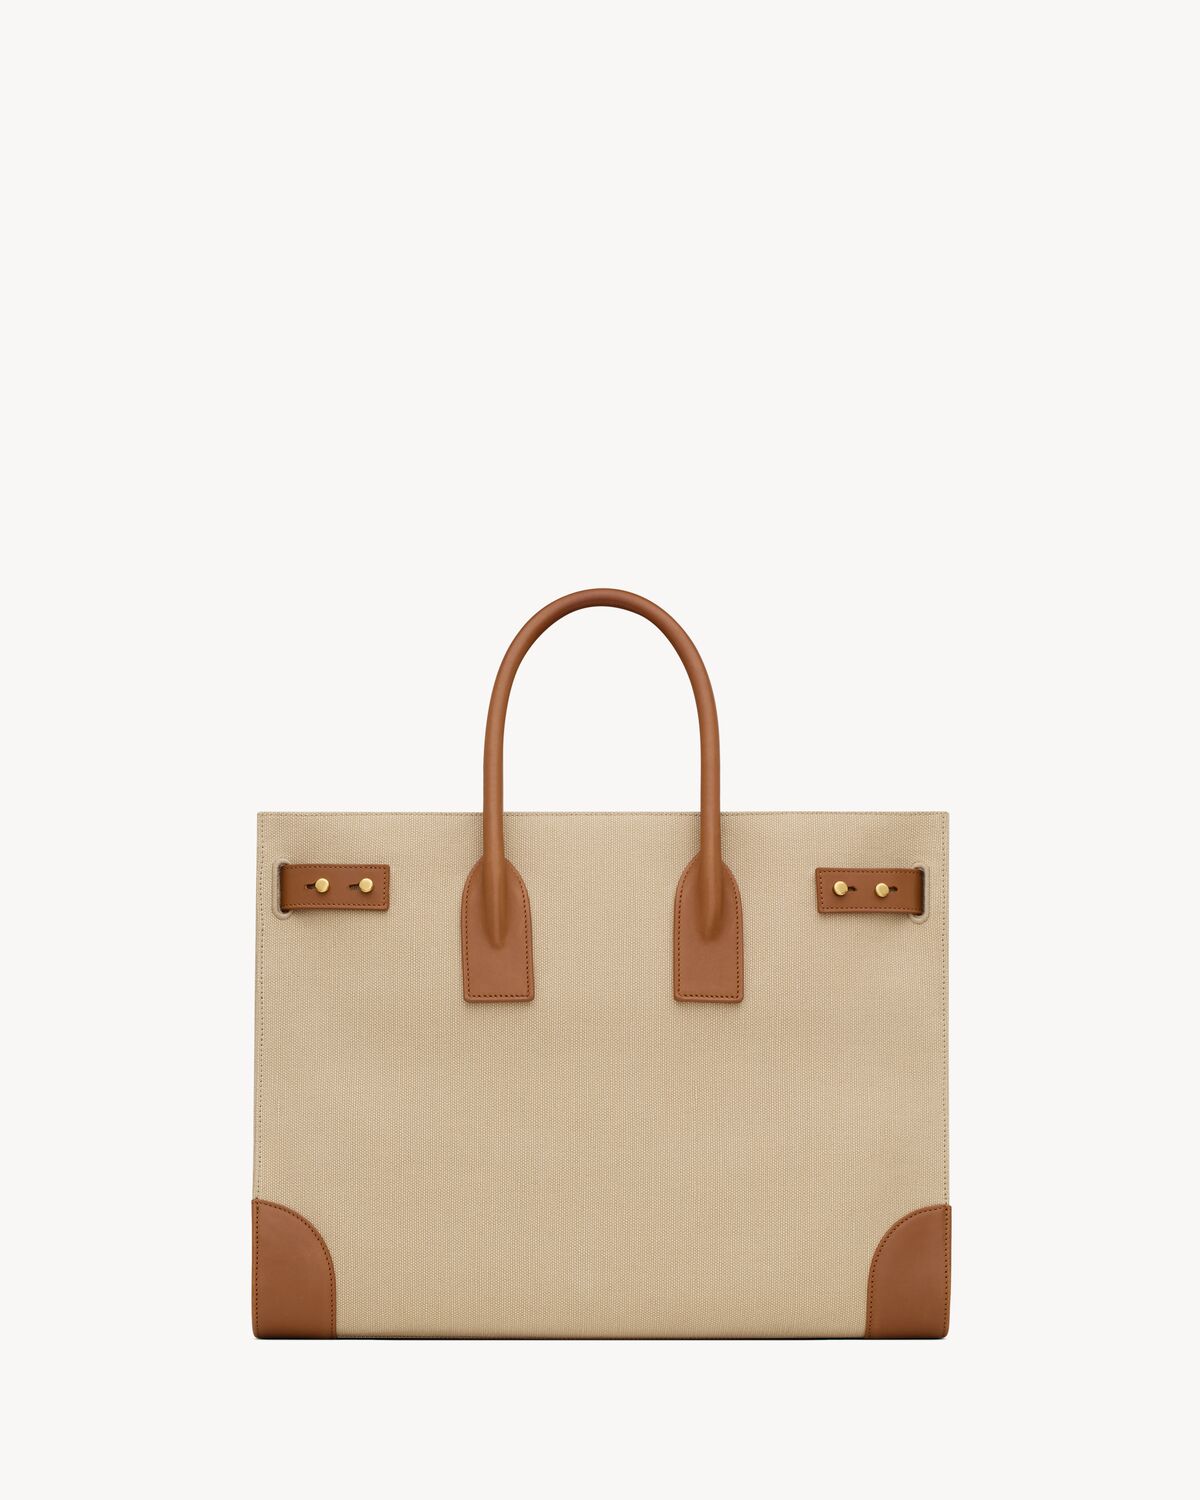 SAC DE JOUR thin large in canvas and vegetable-tanned leather